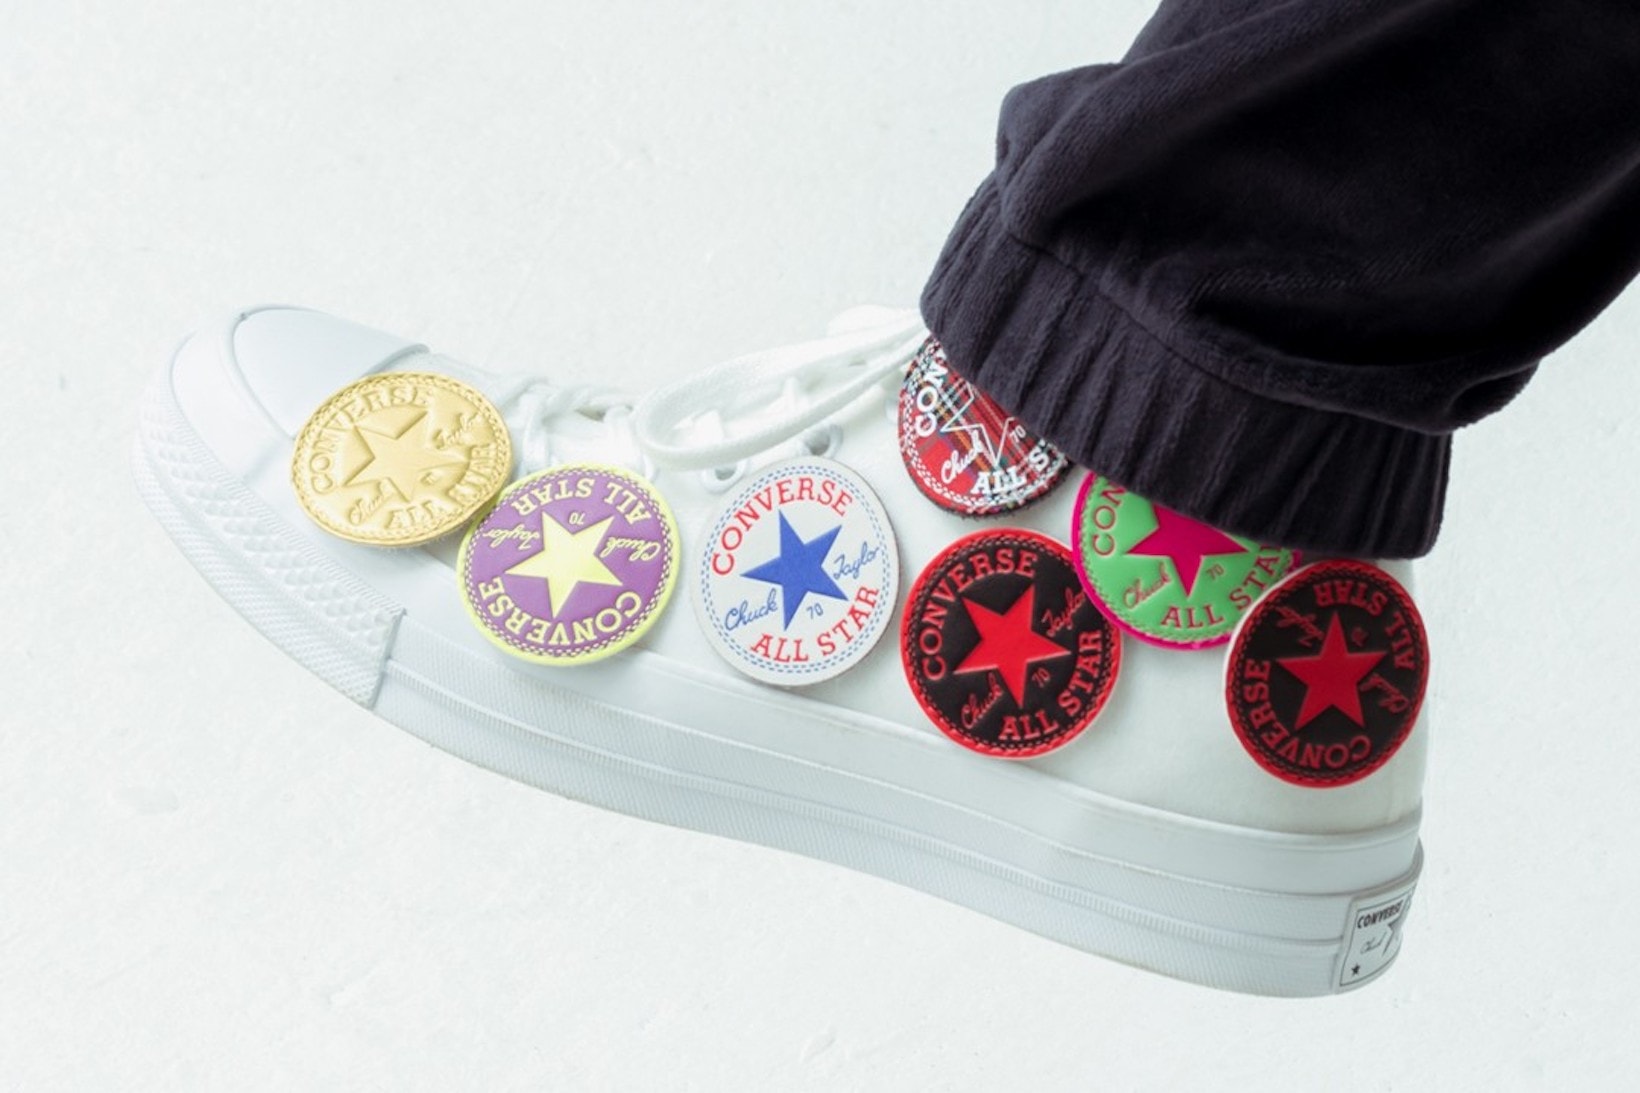 converse size collaboration custom chuck taylors sneakers white black multipatch shoes footwear sneakerhead yellow purple red green blue